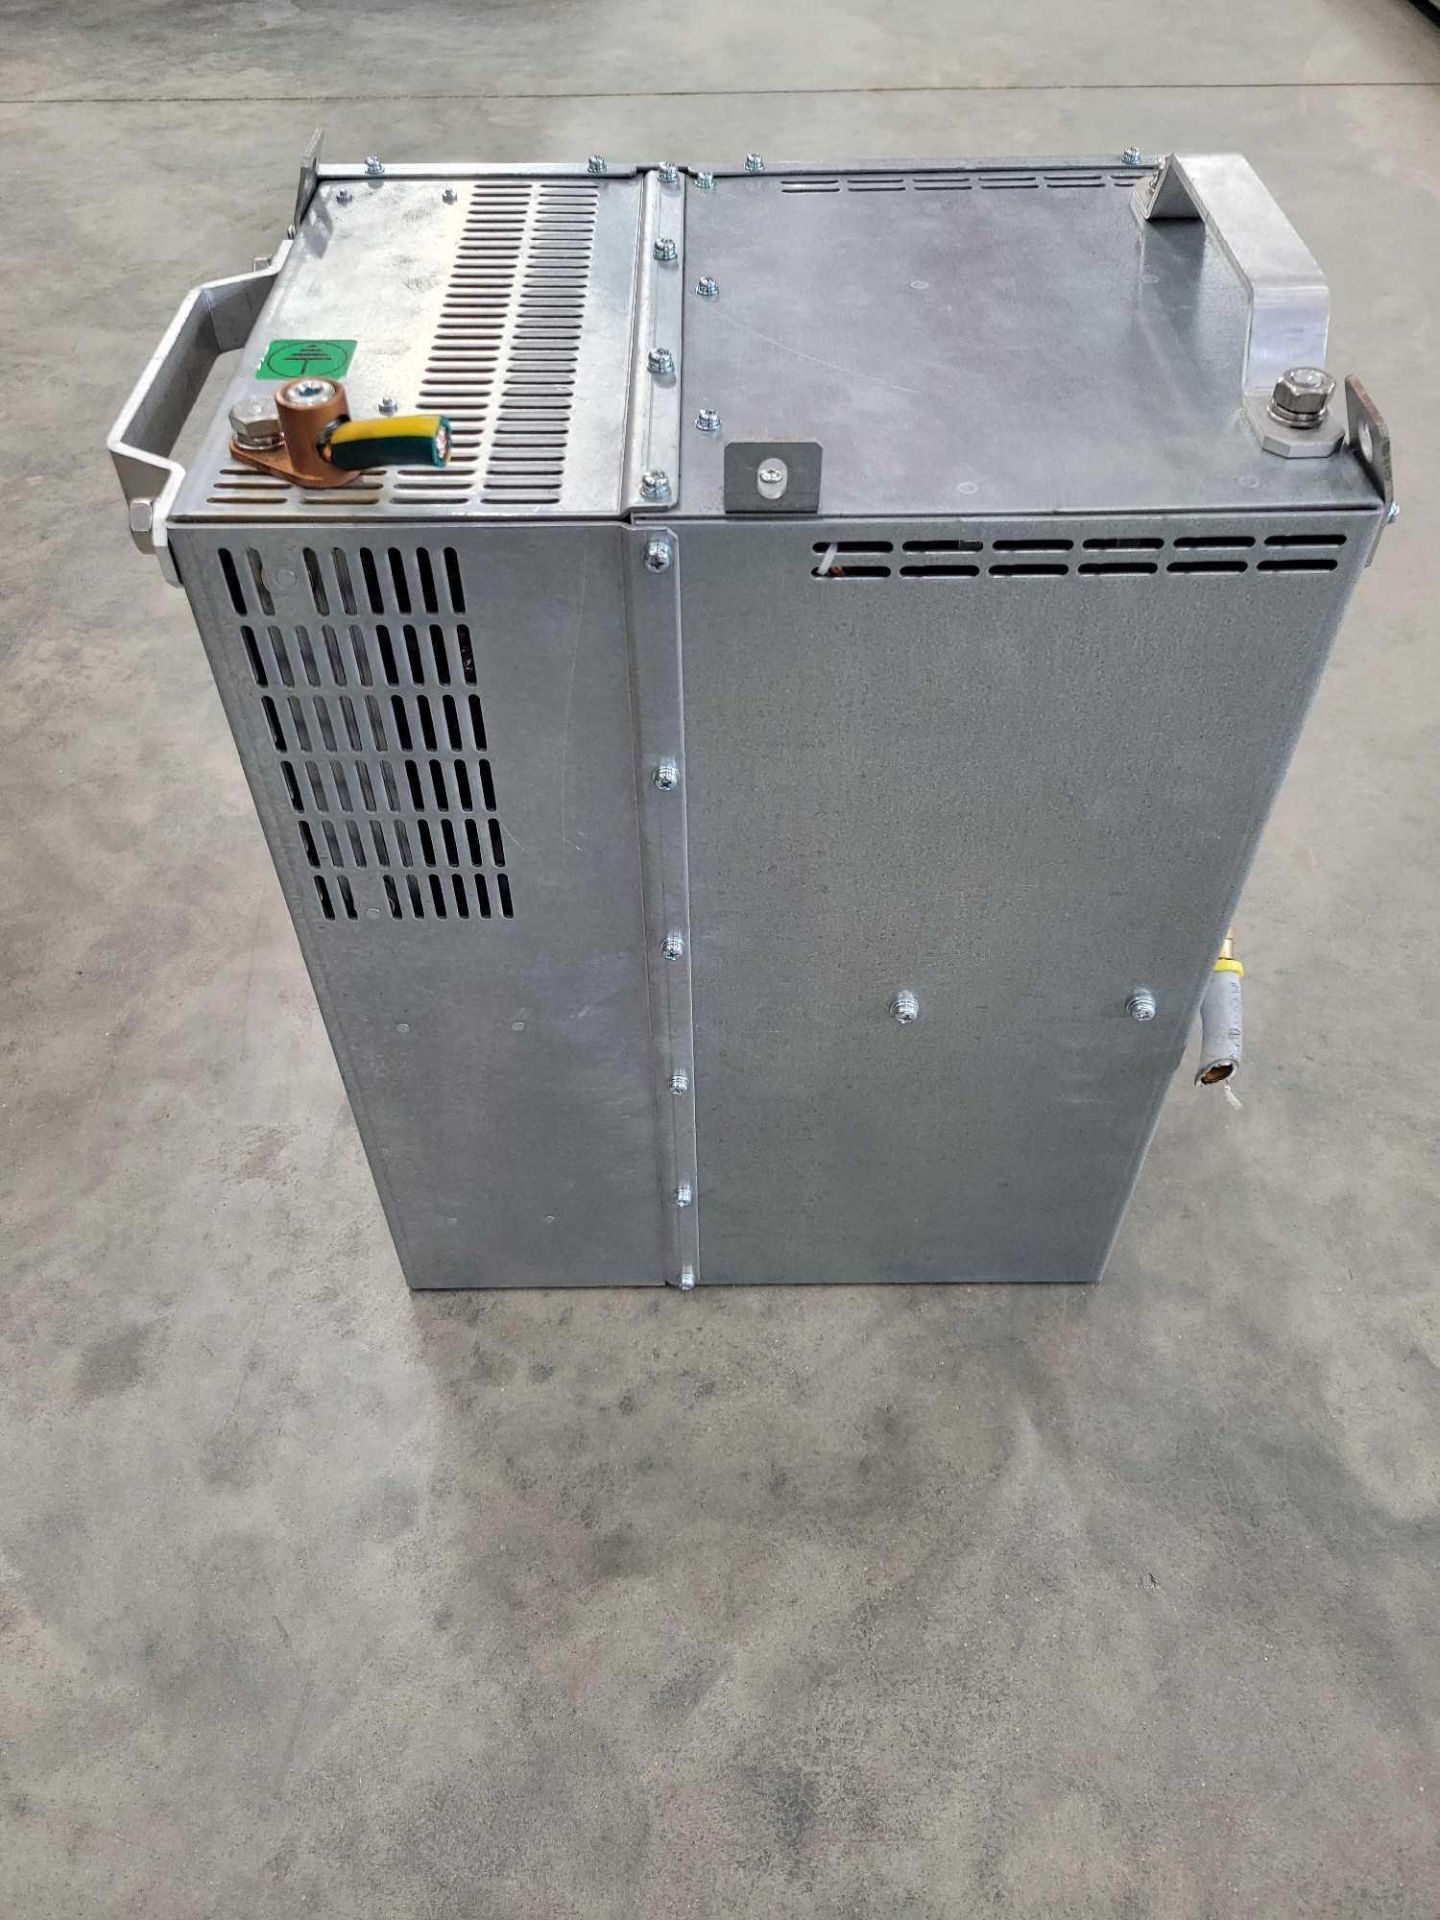 WTC 902-1201 / Gen 6 MFDC Inverter  /  Lot Weight: 105 lbs - Image 4 of 6